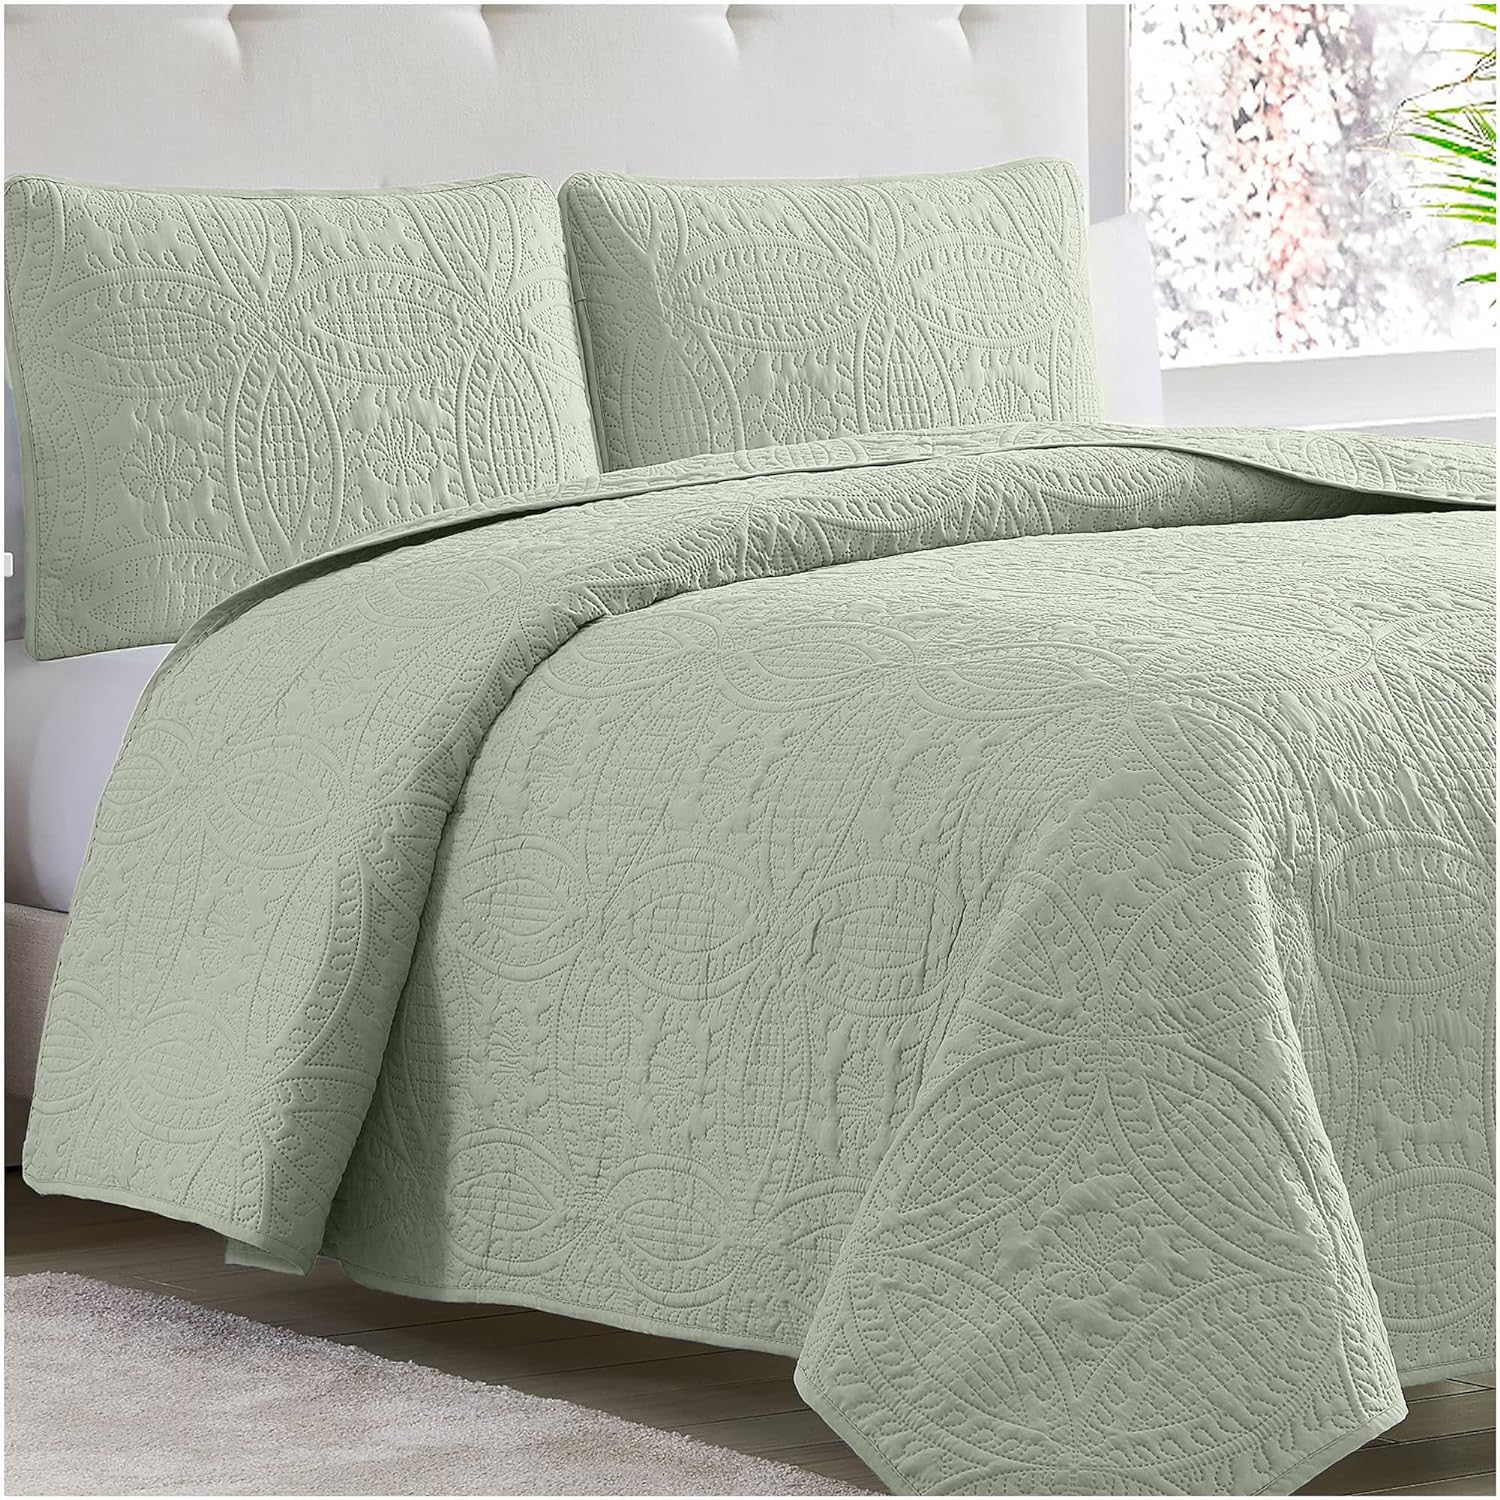 Mellanni Bedspread Coverlet Set - Bedding Cover with Shams - Ultrasonic Quilting Technology - 3 Piece Oversized Full/Queen Size Quilt Set - Bedspreads & Coverlets (Full/Queen, Olive Green) 